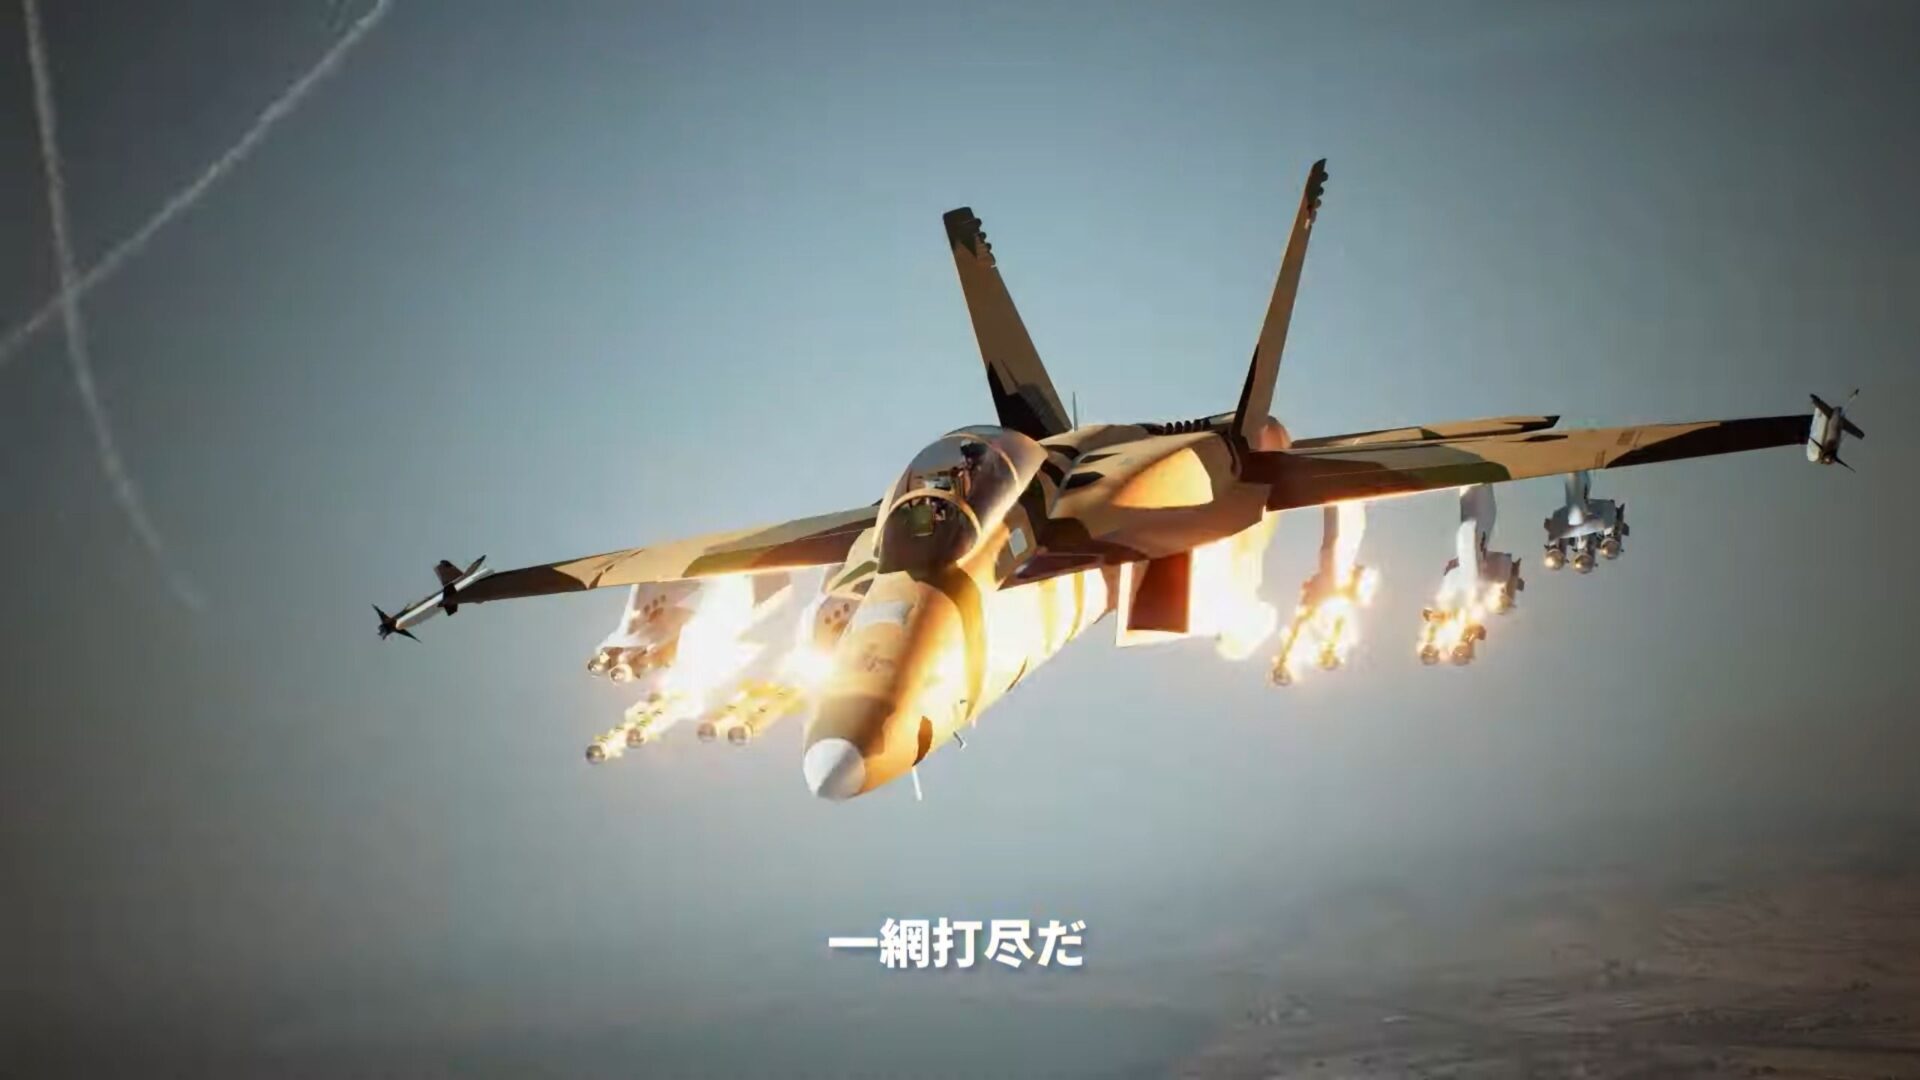 Ace Combat 7: Skies Unknown “Cutting-Edge Aircraft Series” DLC Released With New Trailer